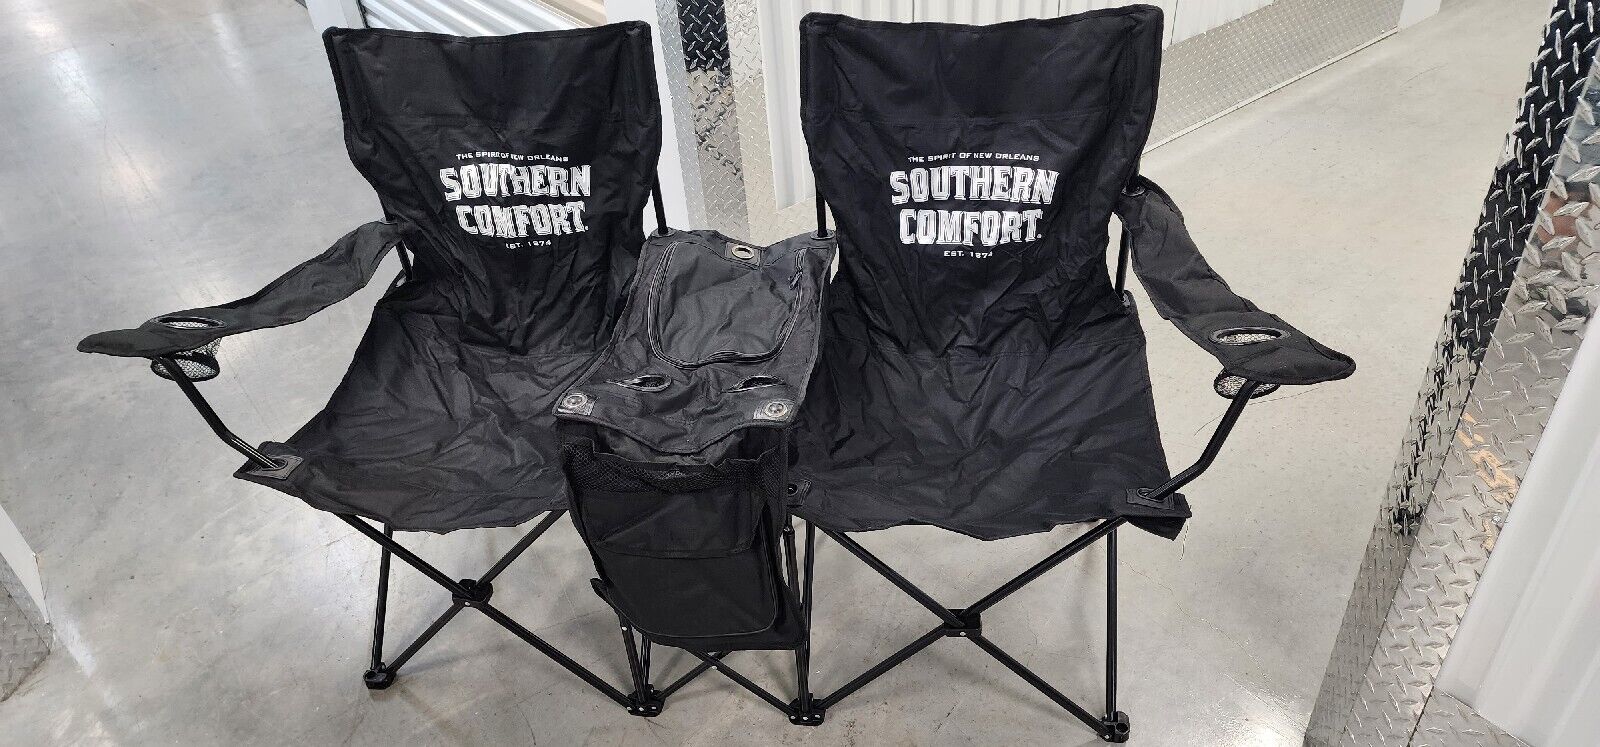 Southern Comfort Foldable Double Lawn Chair w/ Cooler Camping Chair Lawn Chair